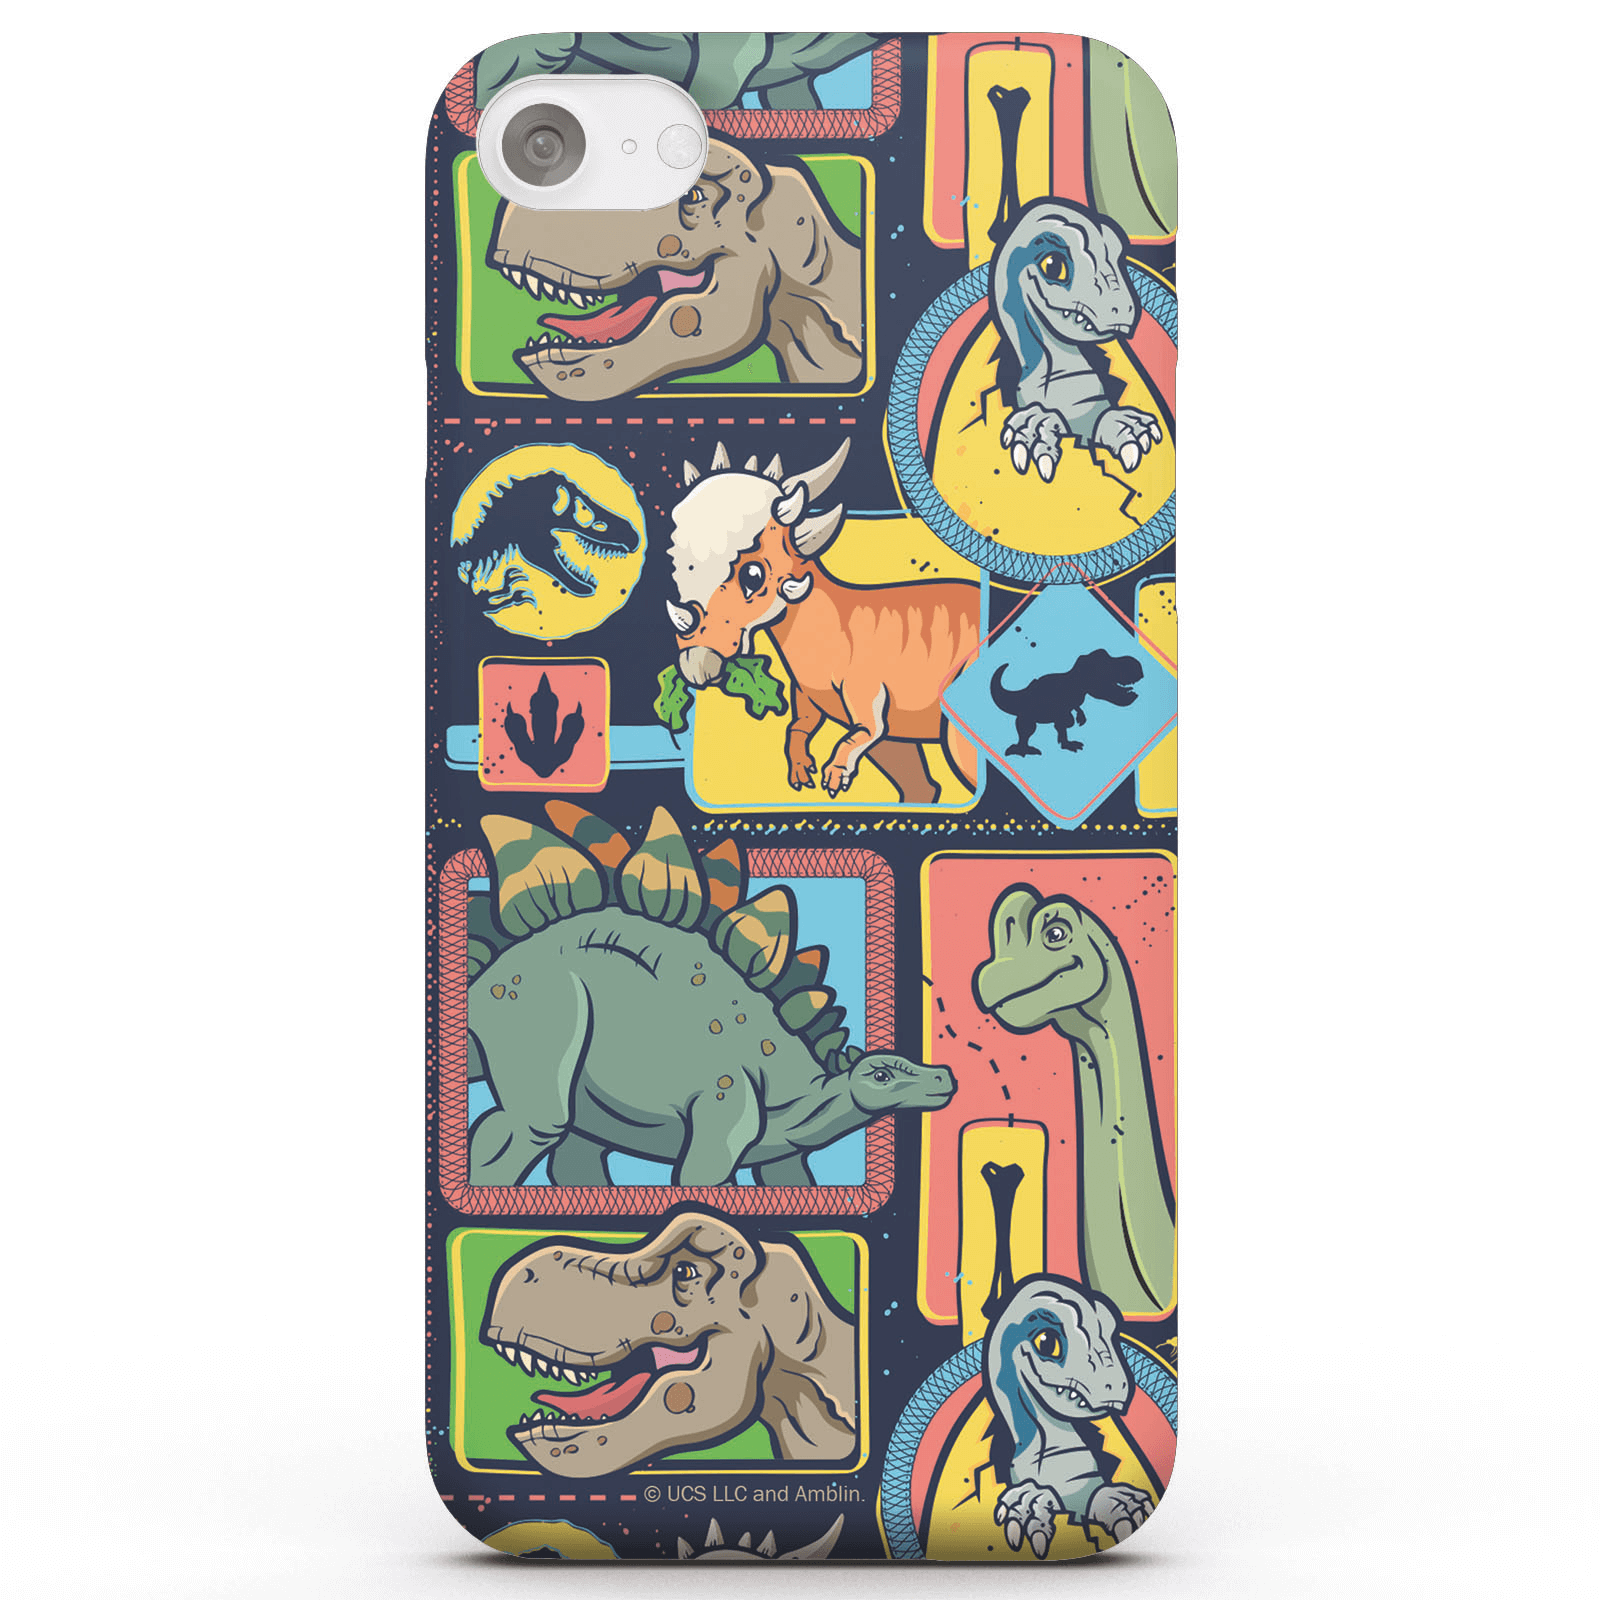 Jurassic Park Cute Dino Pattern Phone Case for iPhone and Android - iPhone 5/5s - Snap Case - Matte